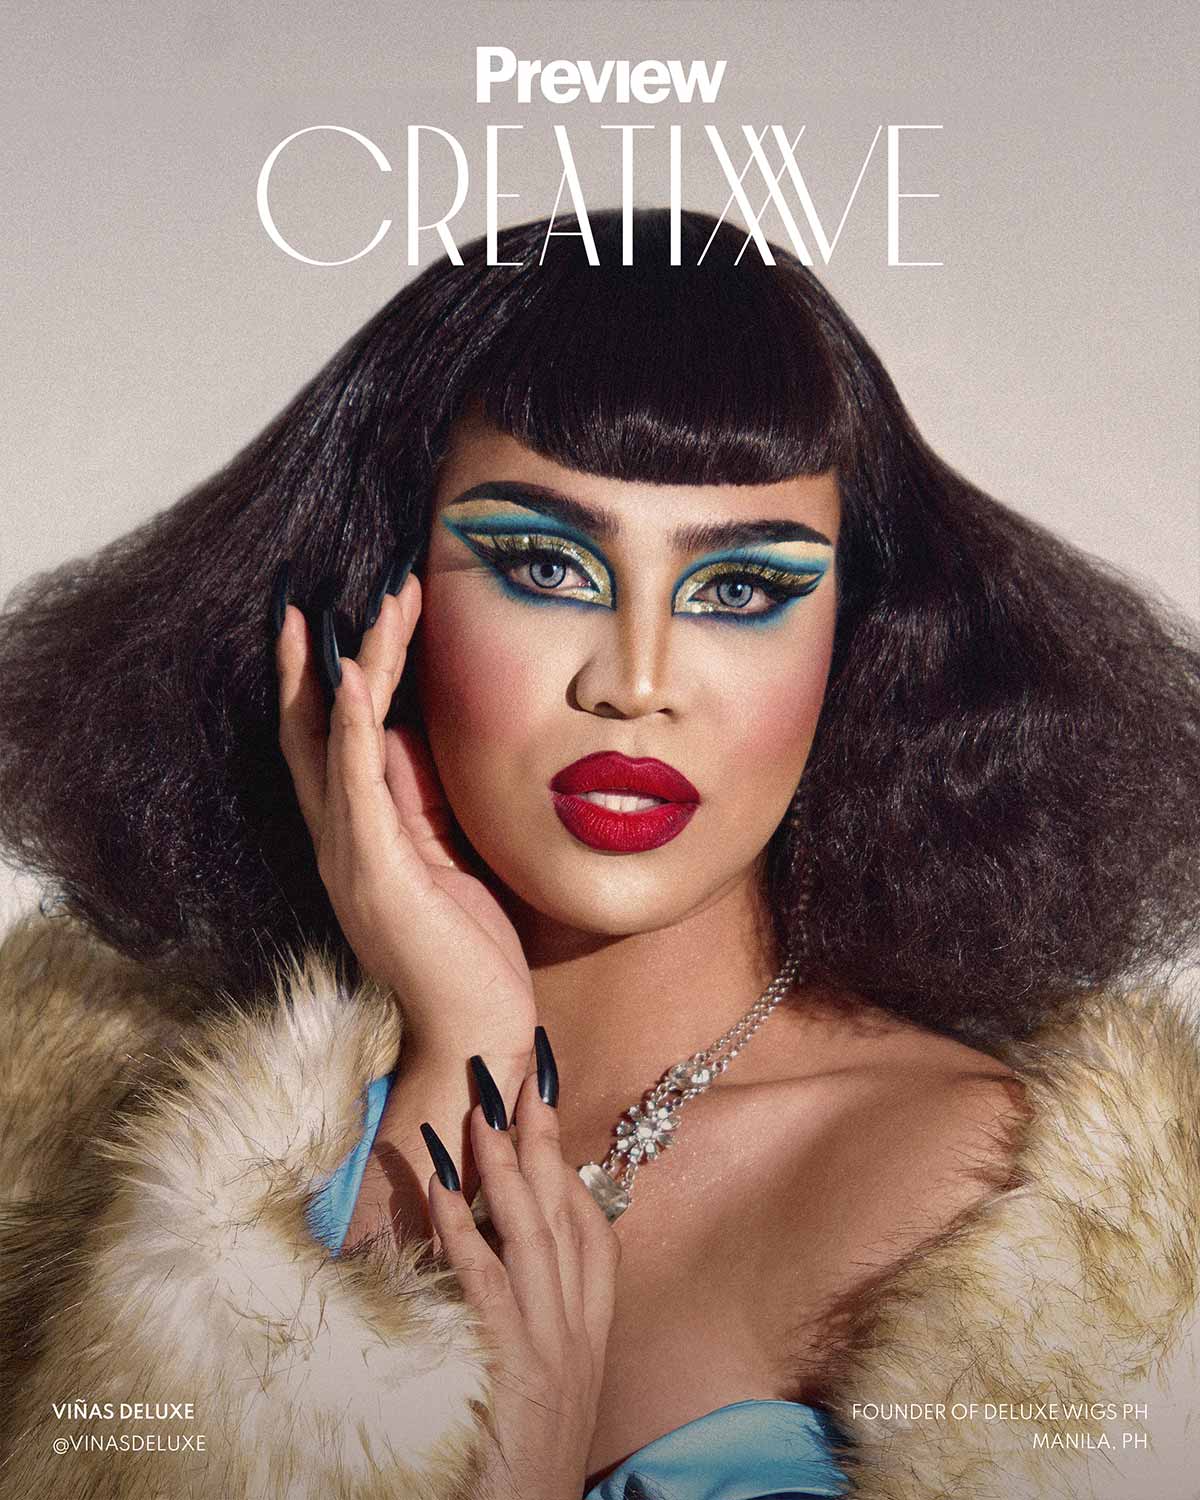 preview creative 25 beauty